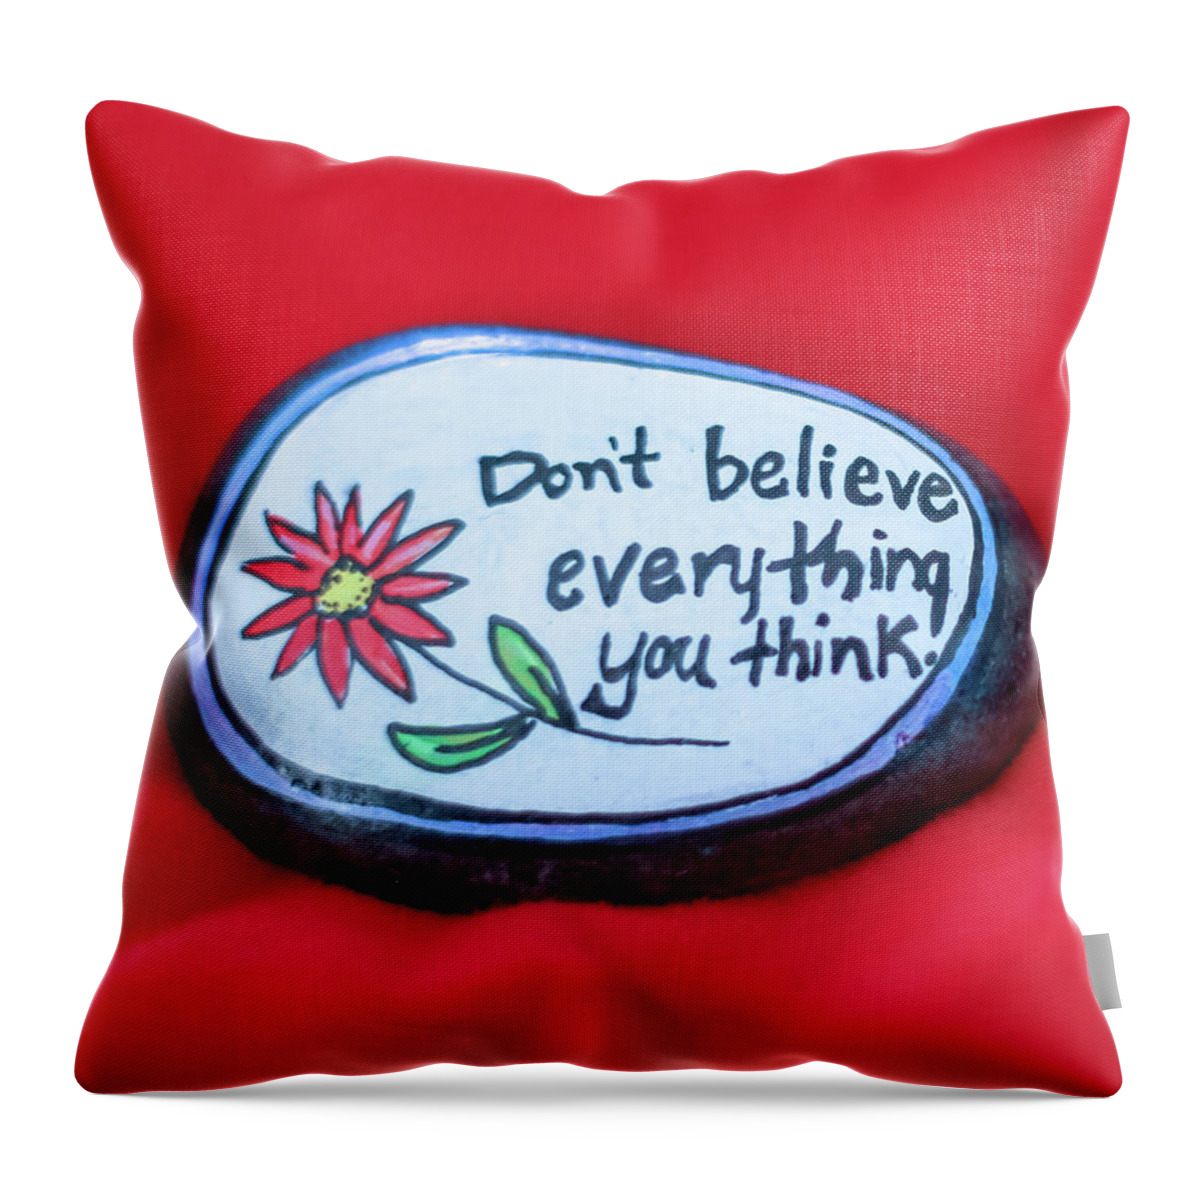 Think Throw Pillow featuring the photograph Don't Believe Everything You Think Painted Rock by Laura Smith